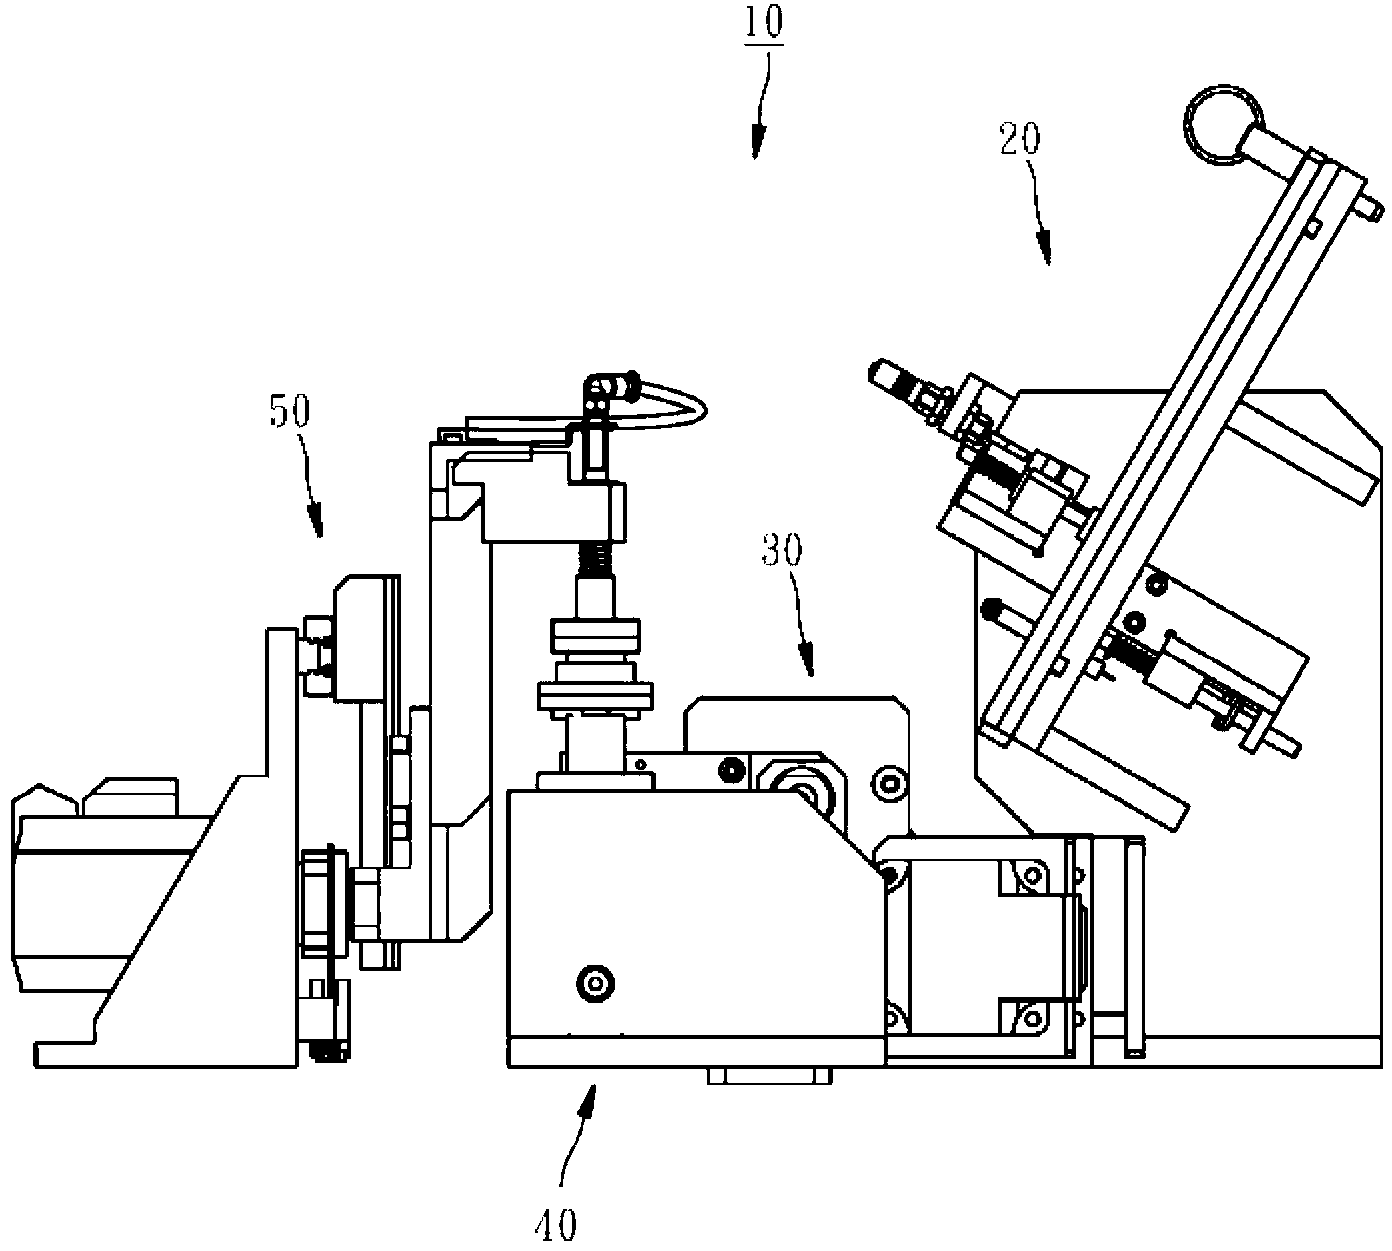 A feed mechanism for an optoelectronic component testing machine